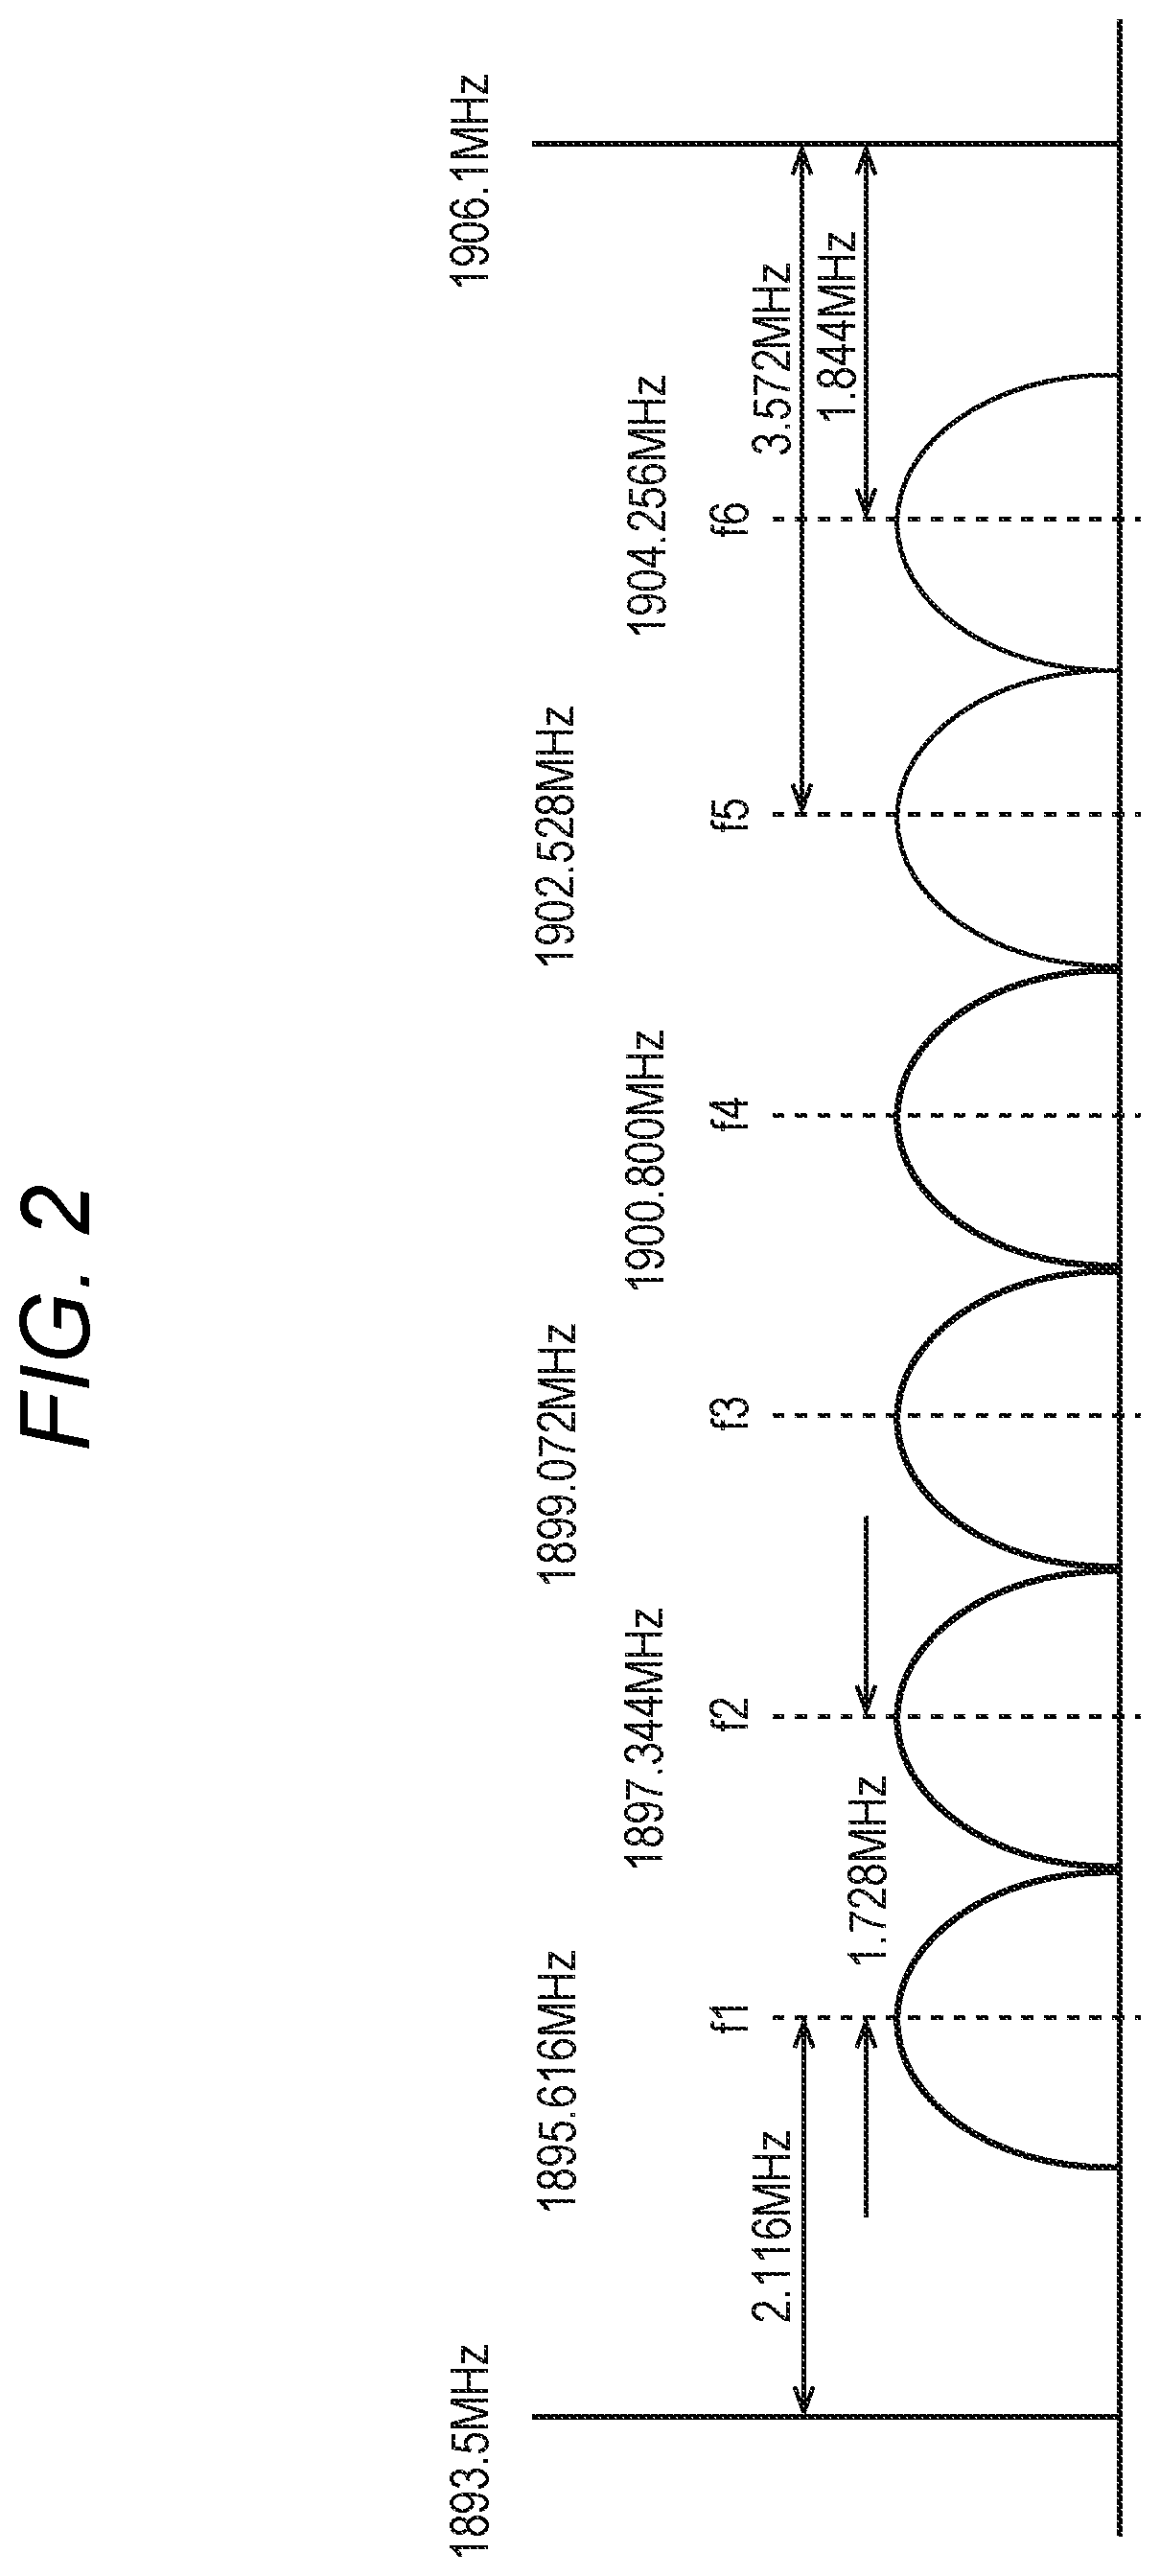 Wireless microphone system, receiving apparatus and wireless synchronization method